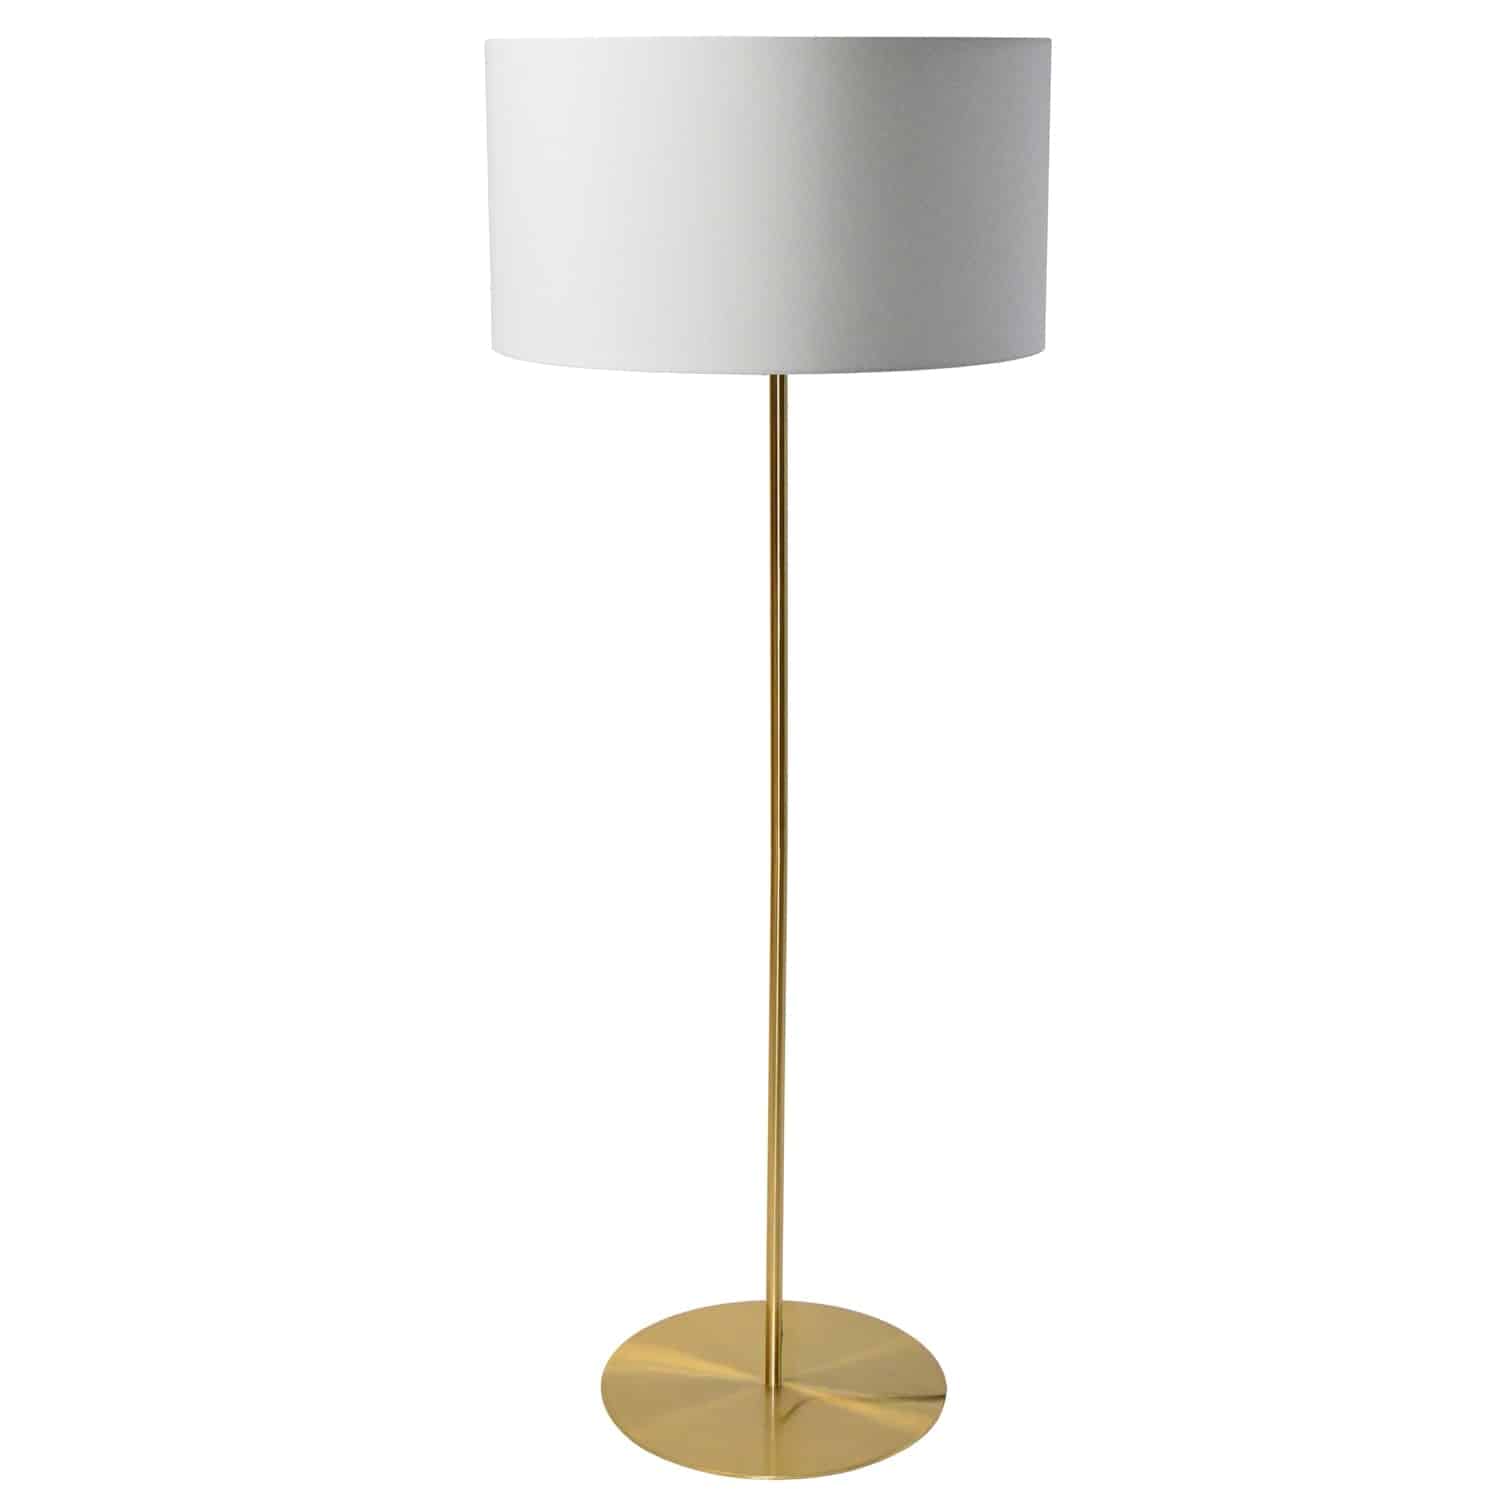 The Maine family of lighting is characterized by a simple silhouette and geometric appeal. Available in floor or table configurations, the look is stylishly simple, and based on contrasting proportions. A round metal base holds a slim rod and frame for a fabric shade. The hardback shade is available in a range of shapes and colors from a simple to tapered drum or cone shade. The look is classically contemporary, with clean lines that will enhance the furnishings in your bedroom, living room or office space.